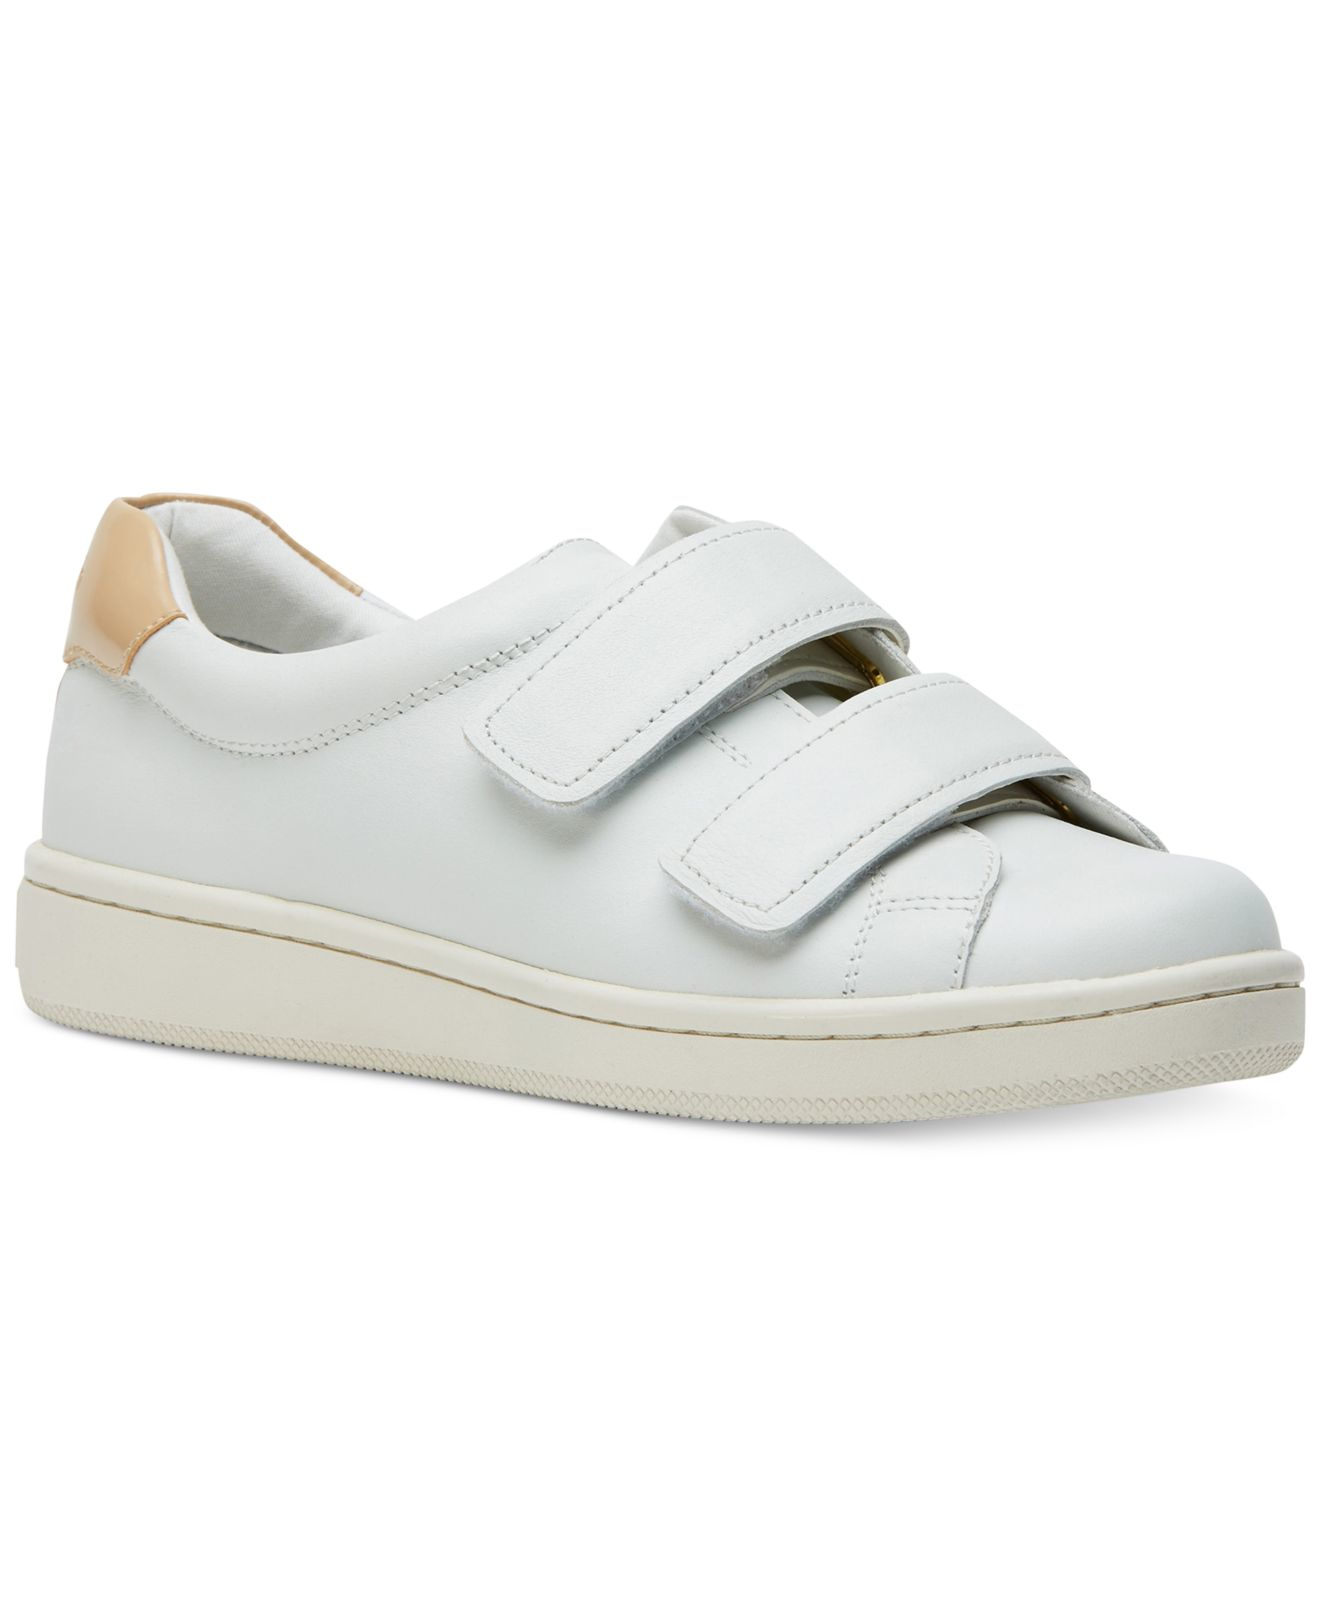 womens trainers with velcro straps